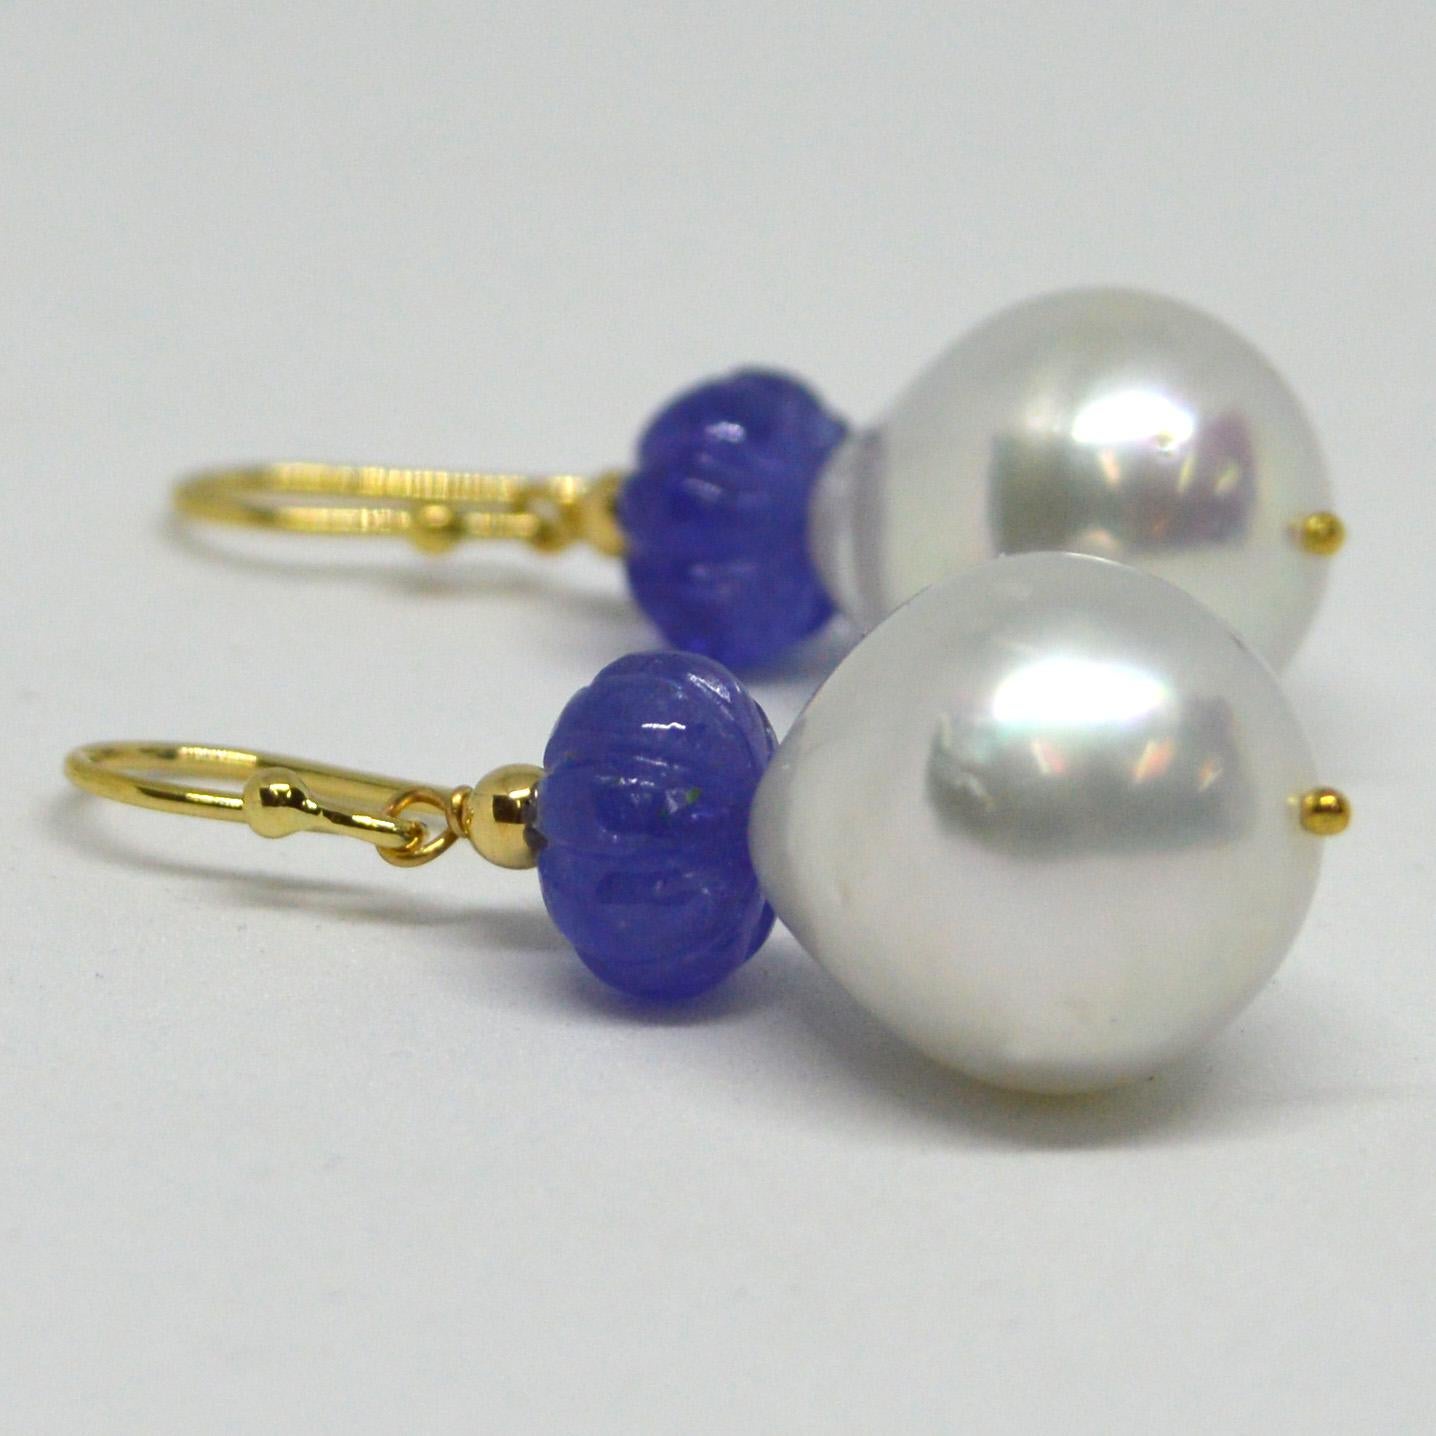 Natural Carved Tanzanite 9.3x5.6mm with 15x14mm high sheen South Sea Pearls set on 9ct yellow Gold Sheppard,  14k Gold head pin and 3mm round bead.

Total Earring length 40mm.